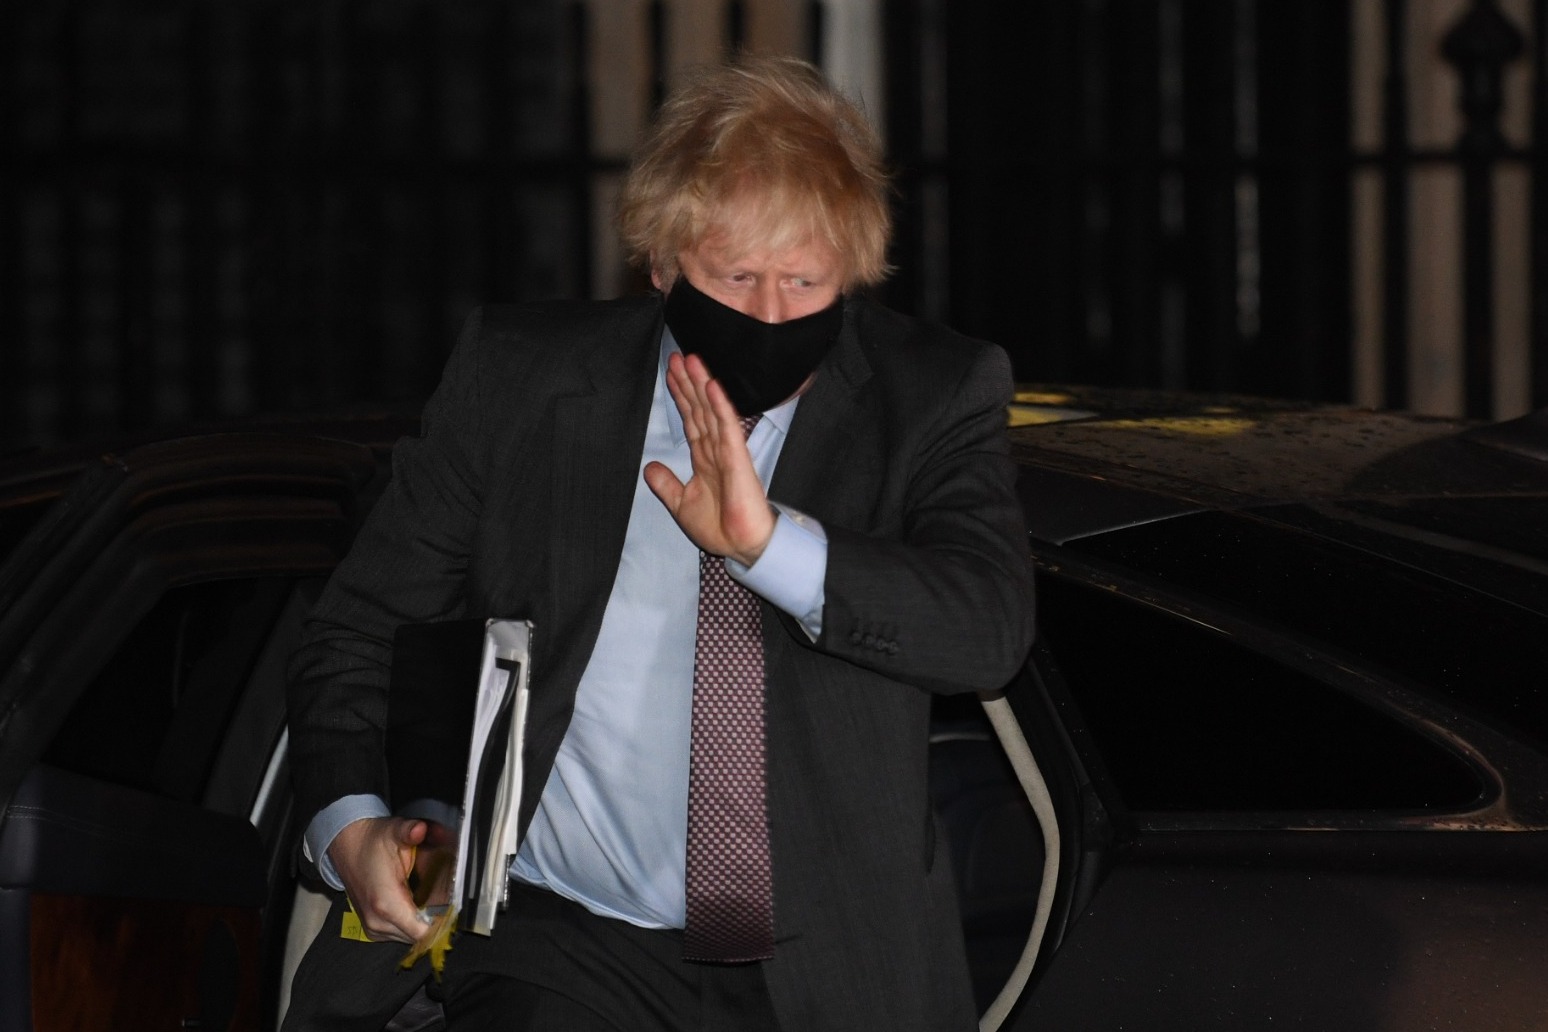 ‘End in sight’ for lockdown as Boris Johnson sets out four-stage plan 